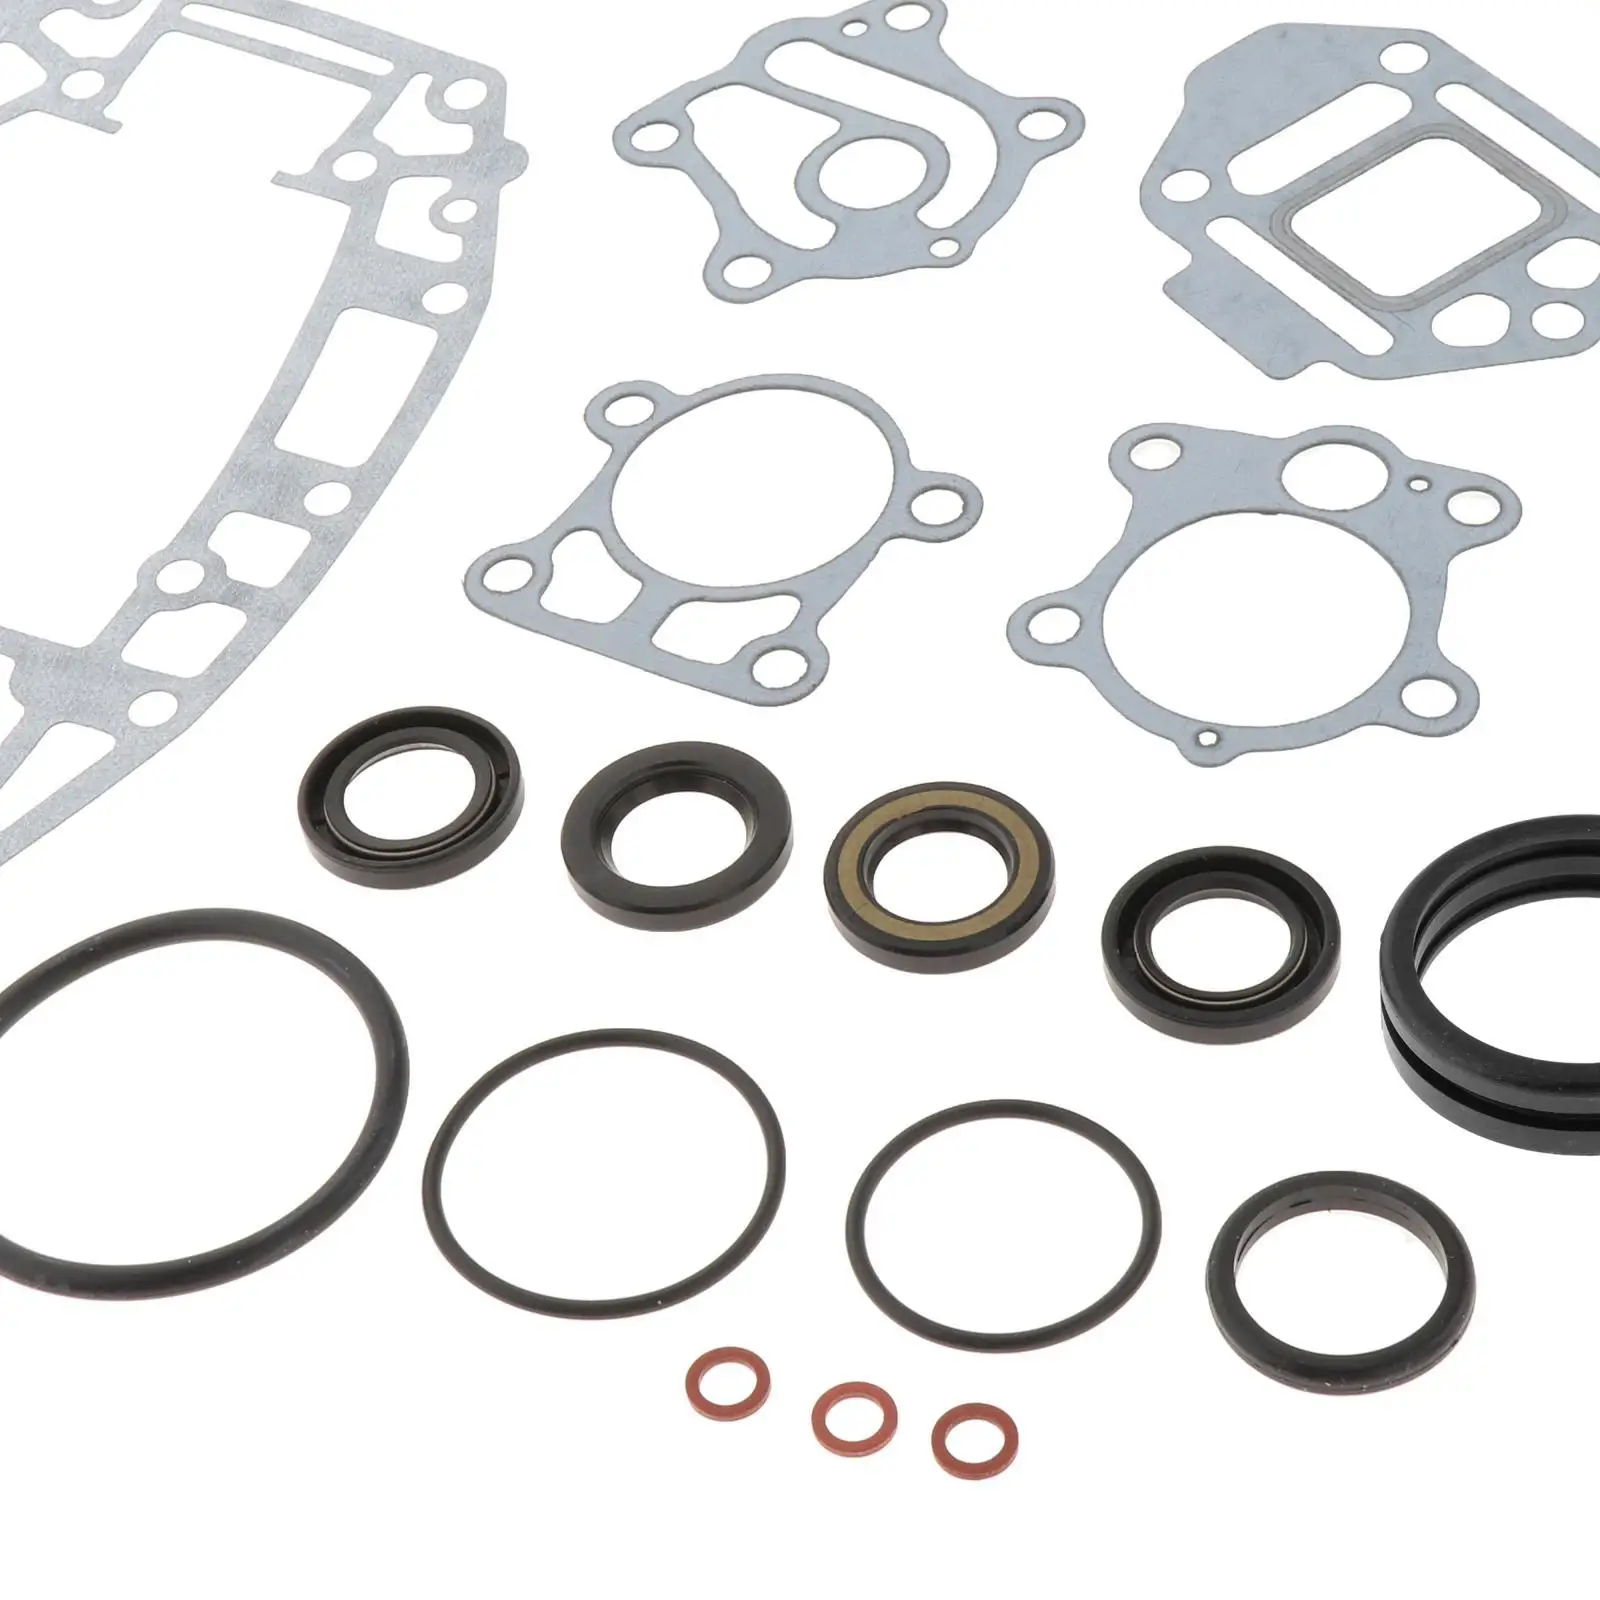 6H4-W0001-20-00 Lower Unit Gasket Kit, Fit for Yamaha Series 30HP 40HP Parts